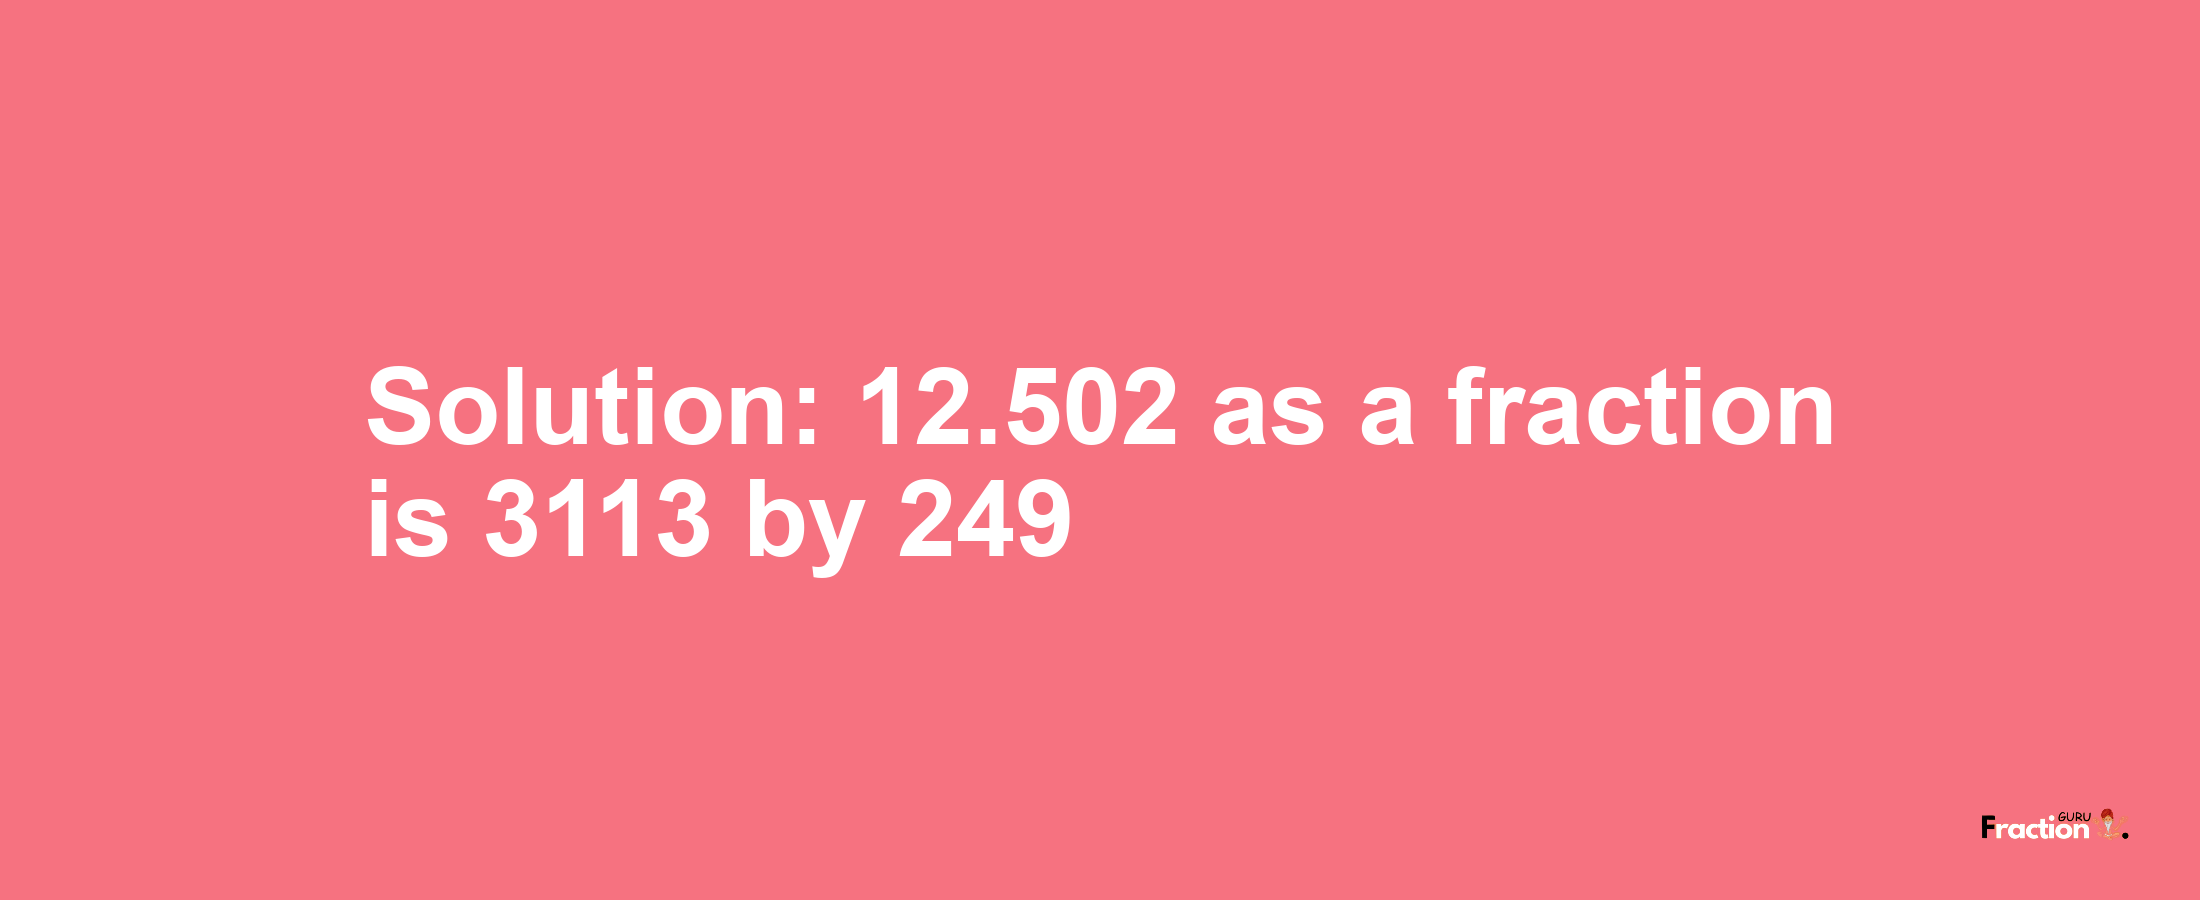 Solution:12.502 as a fraction is 3113/249